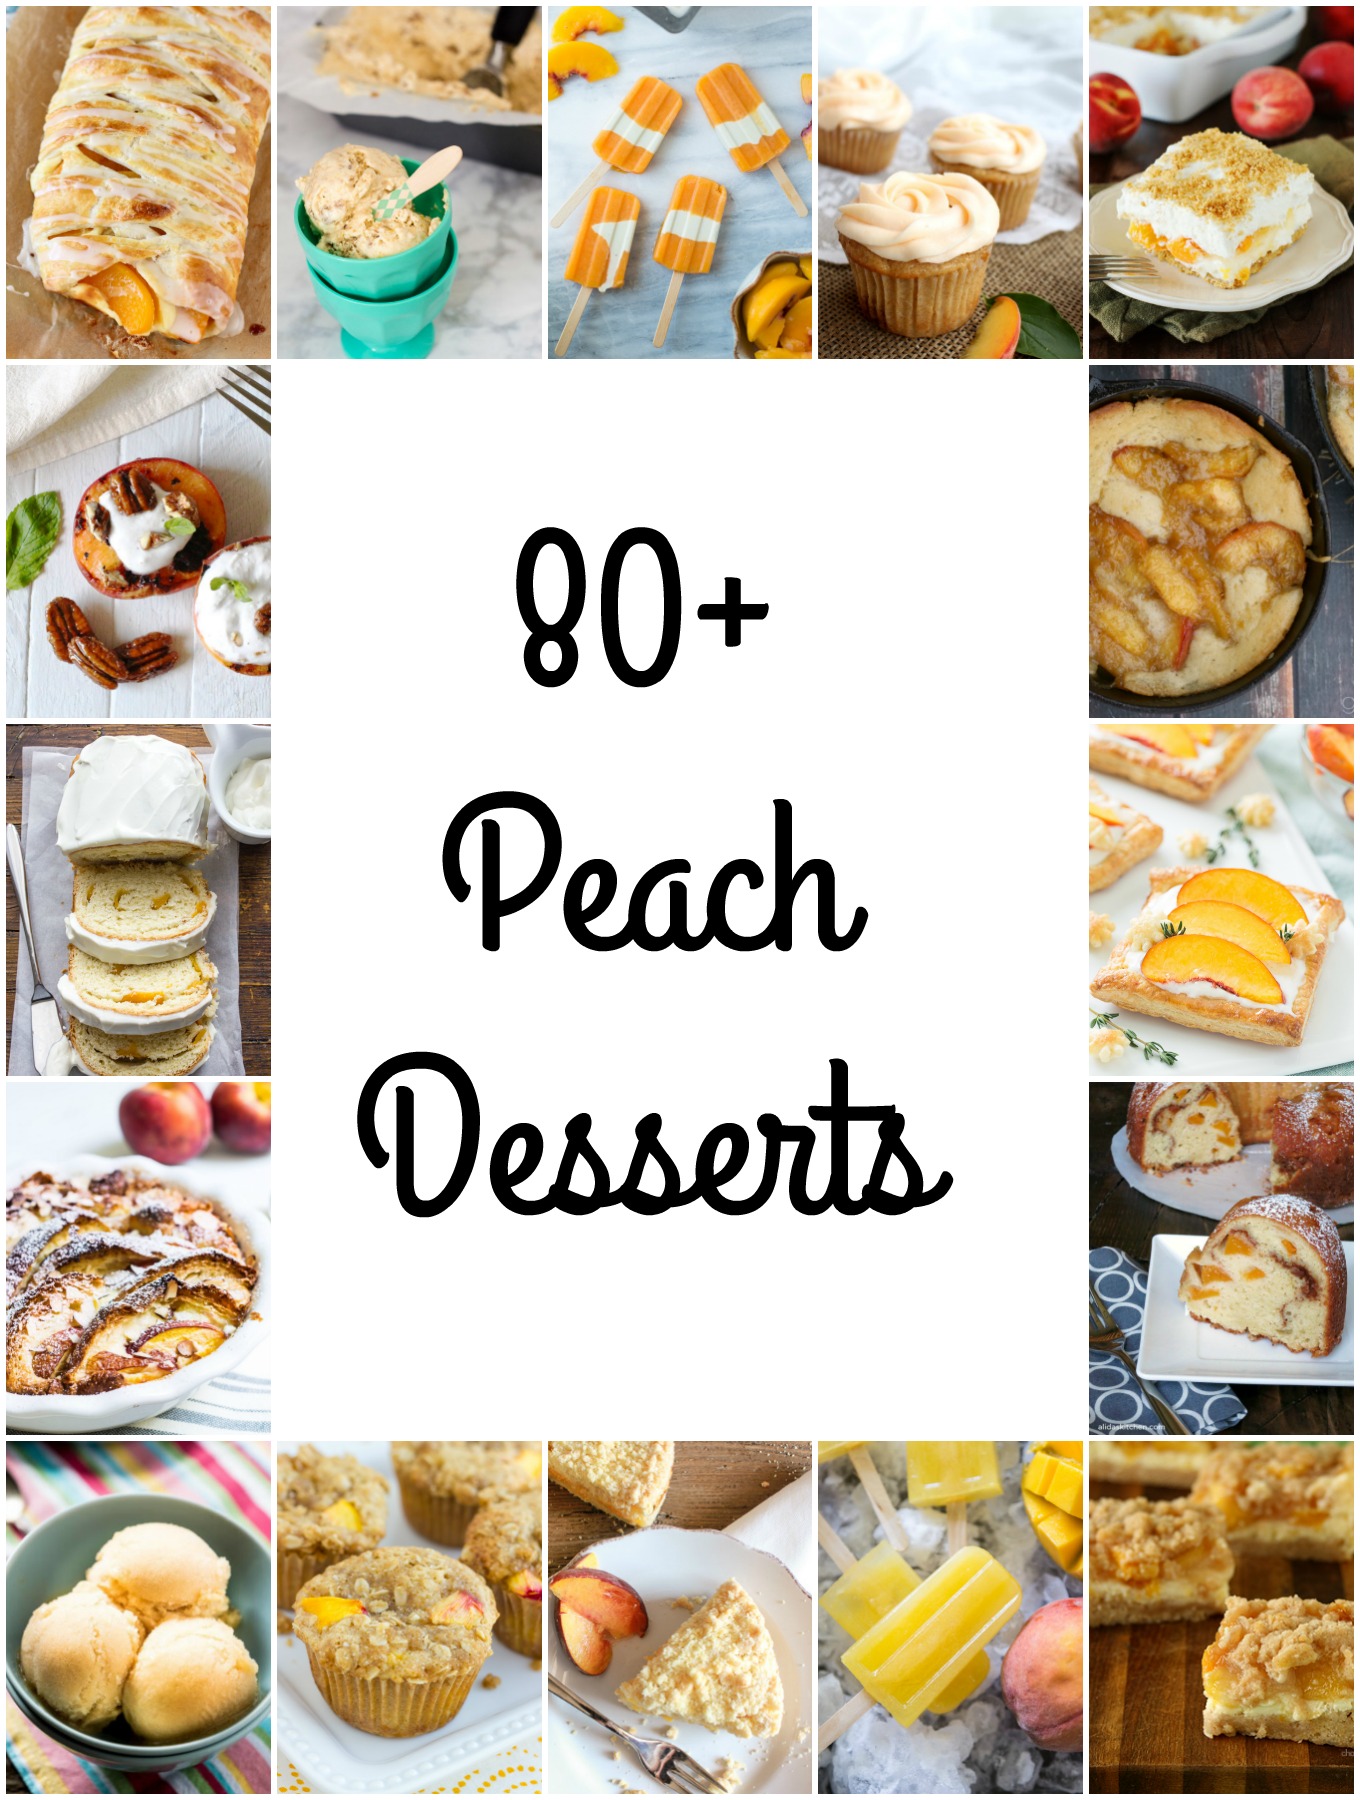 I've compiled over 80 peach dessert recipes featuring the fruit in cakes, cupcakes, cheesecakes, cookies, ice cream, pies and more for National Peach Month.